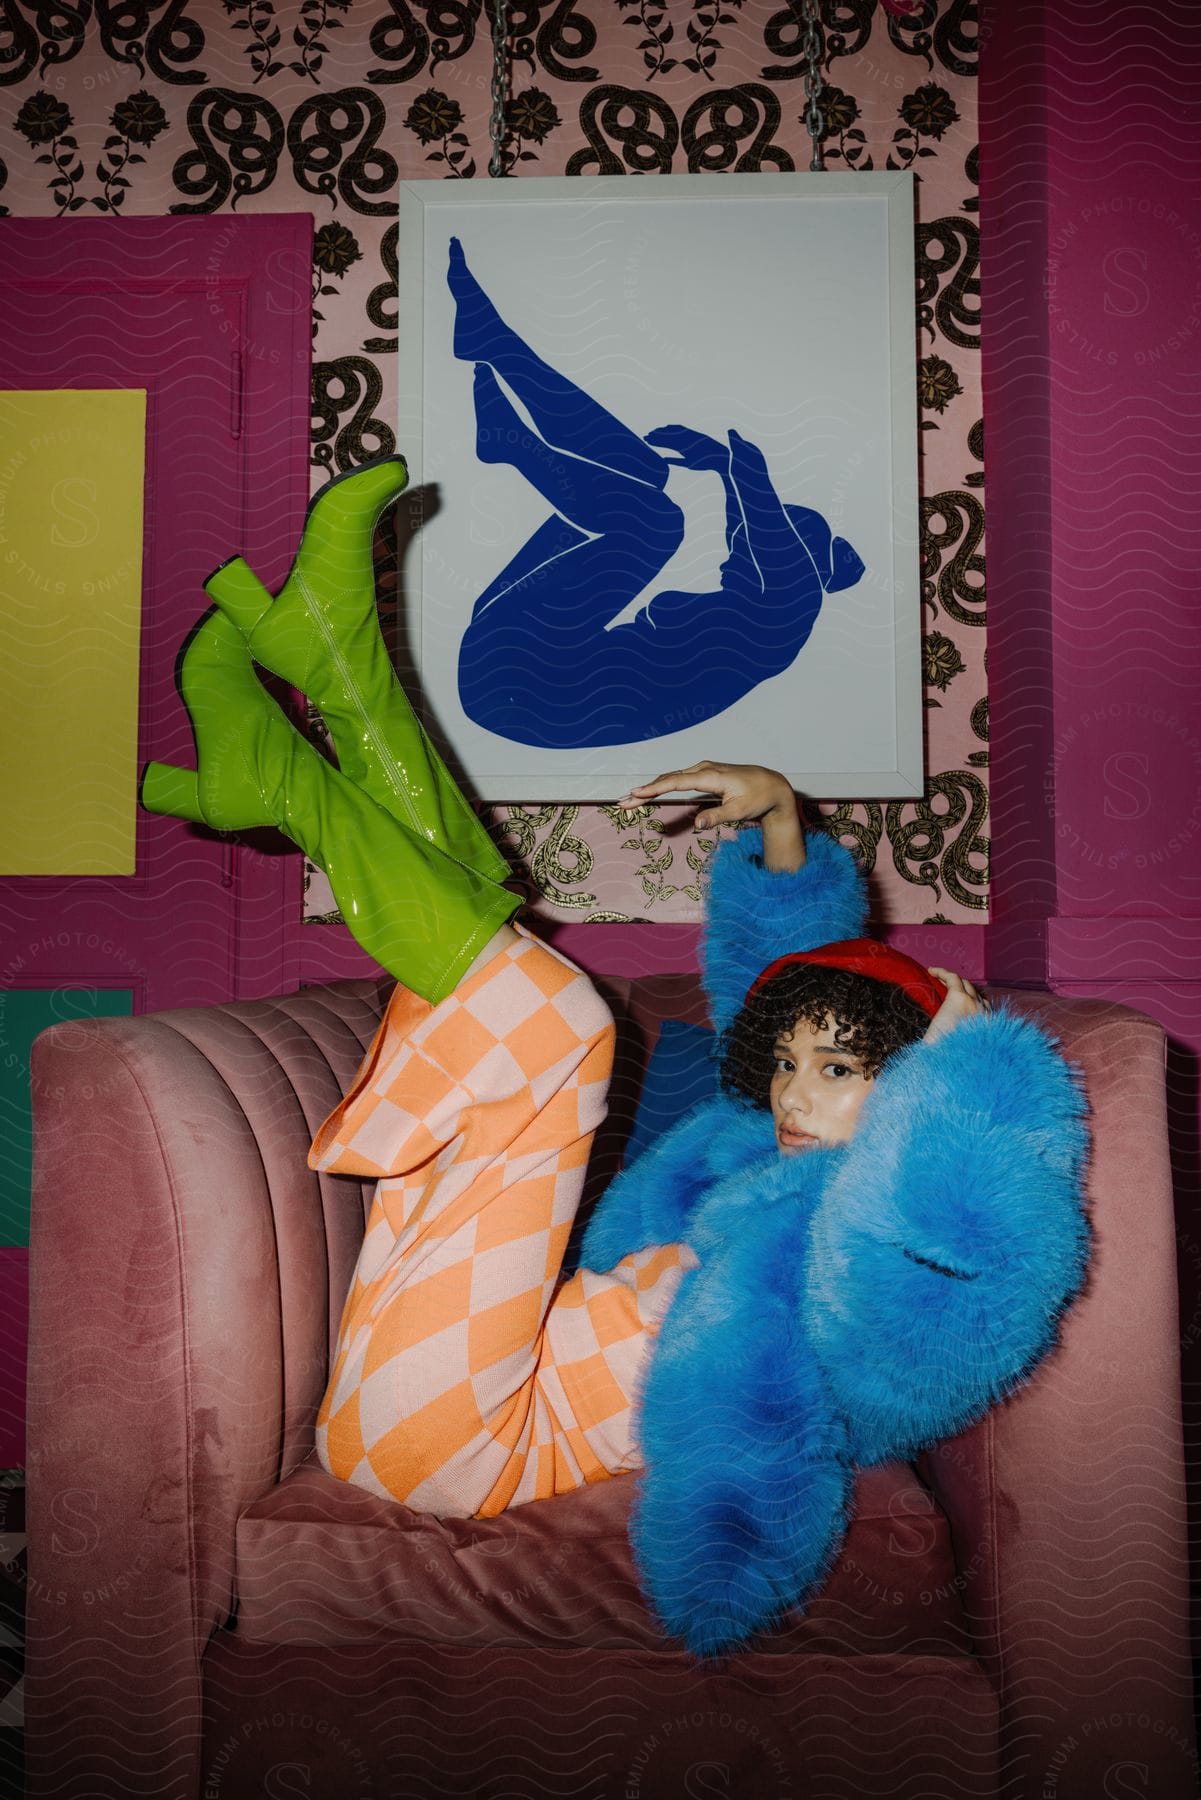 Woman reclining on a pink armchair with blue furry coat and green boots, orange and white striped dress with blue silhouette art behind her.